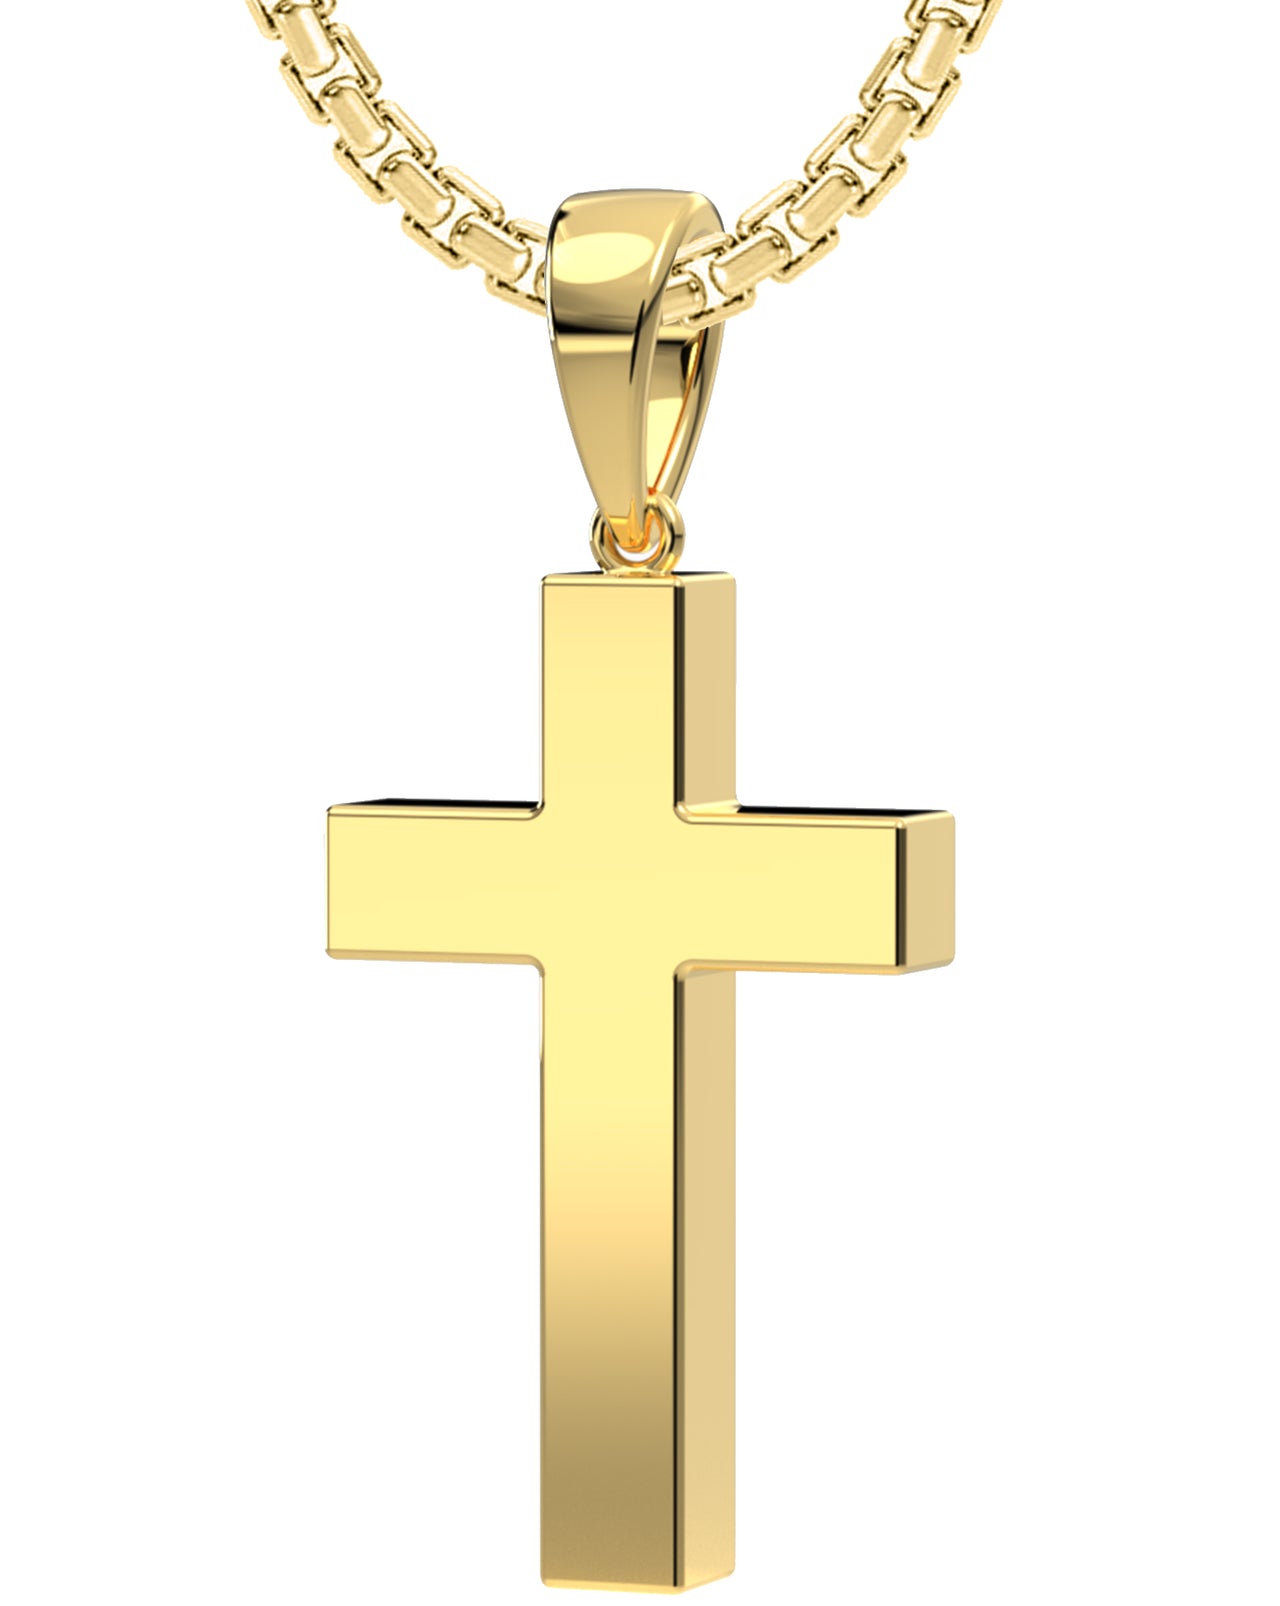 Heavy Solid 4mm x 4mm Box  14k Yellow Gold Christian Cross Pendant Necklace, 26mm